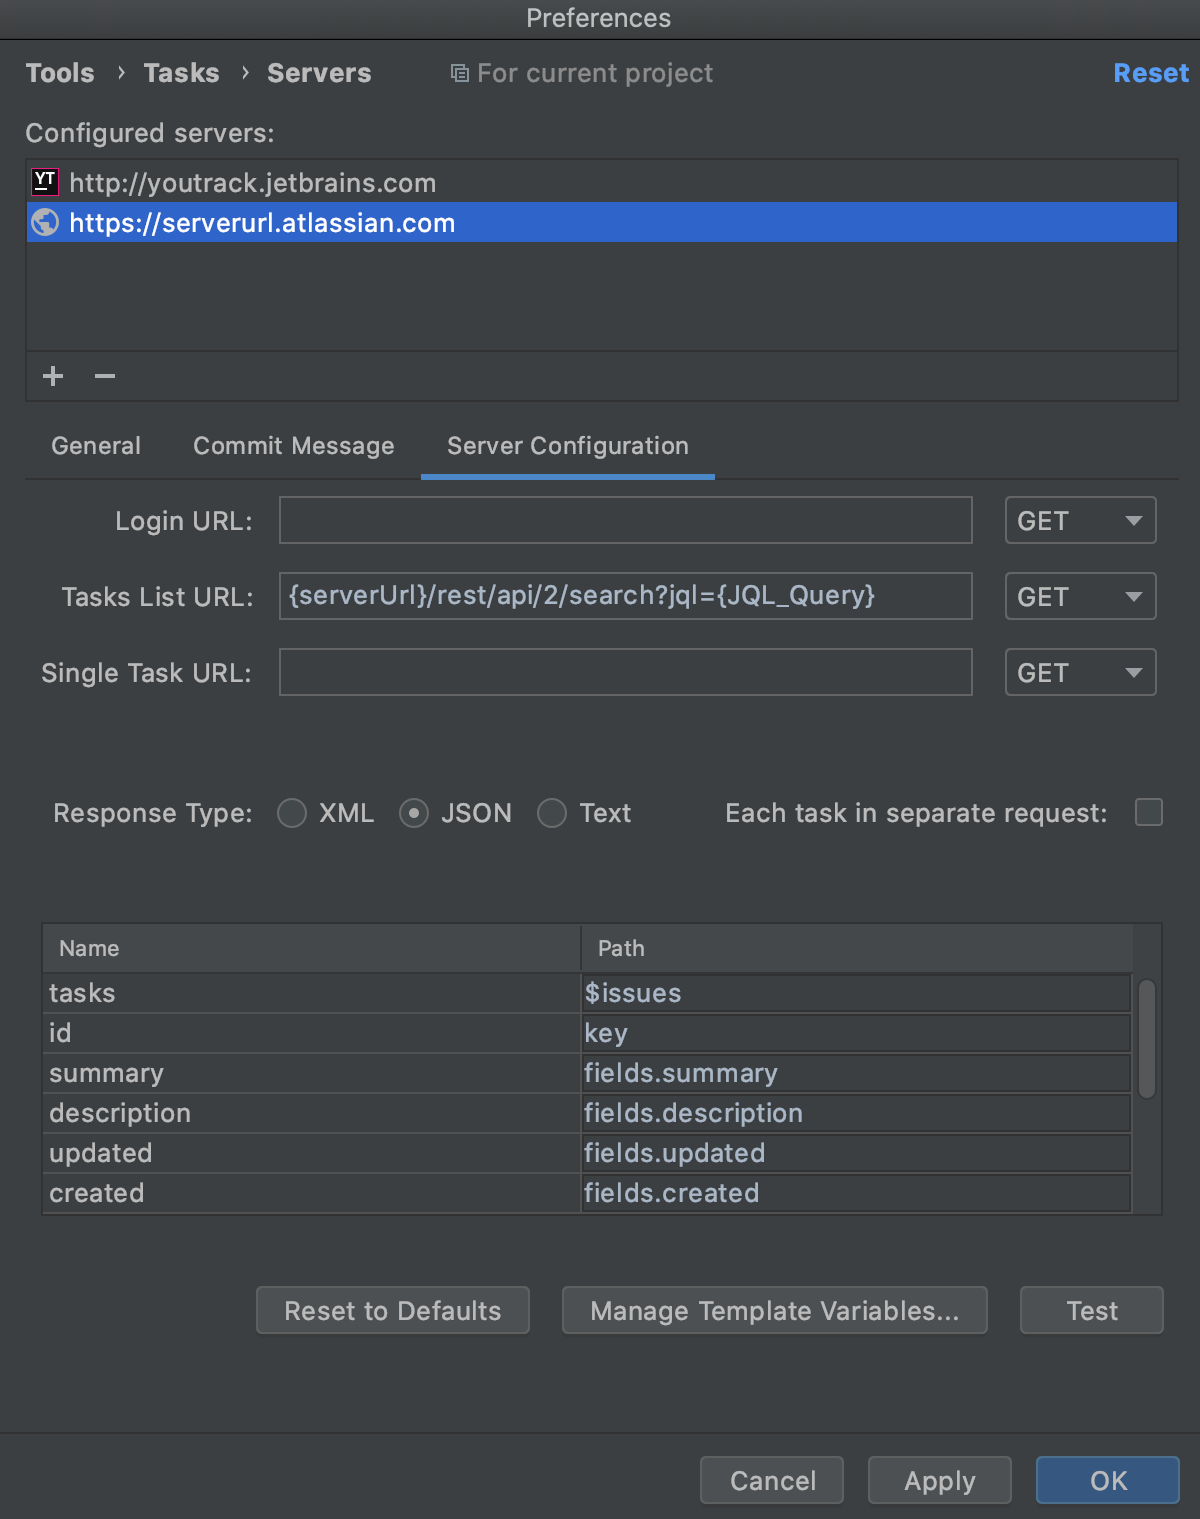 Configuring a response type and specifying selectors